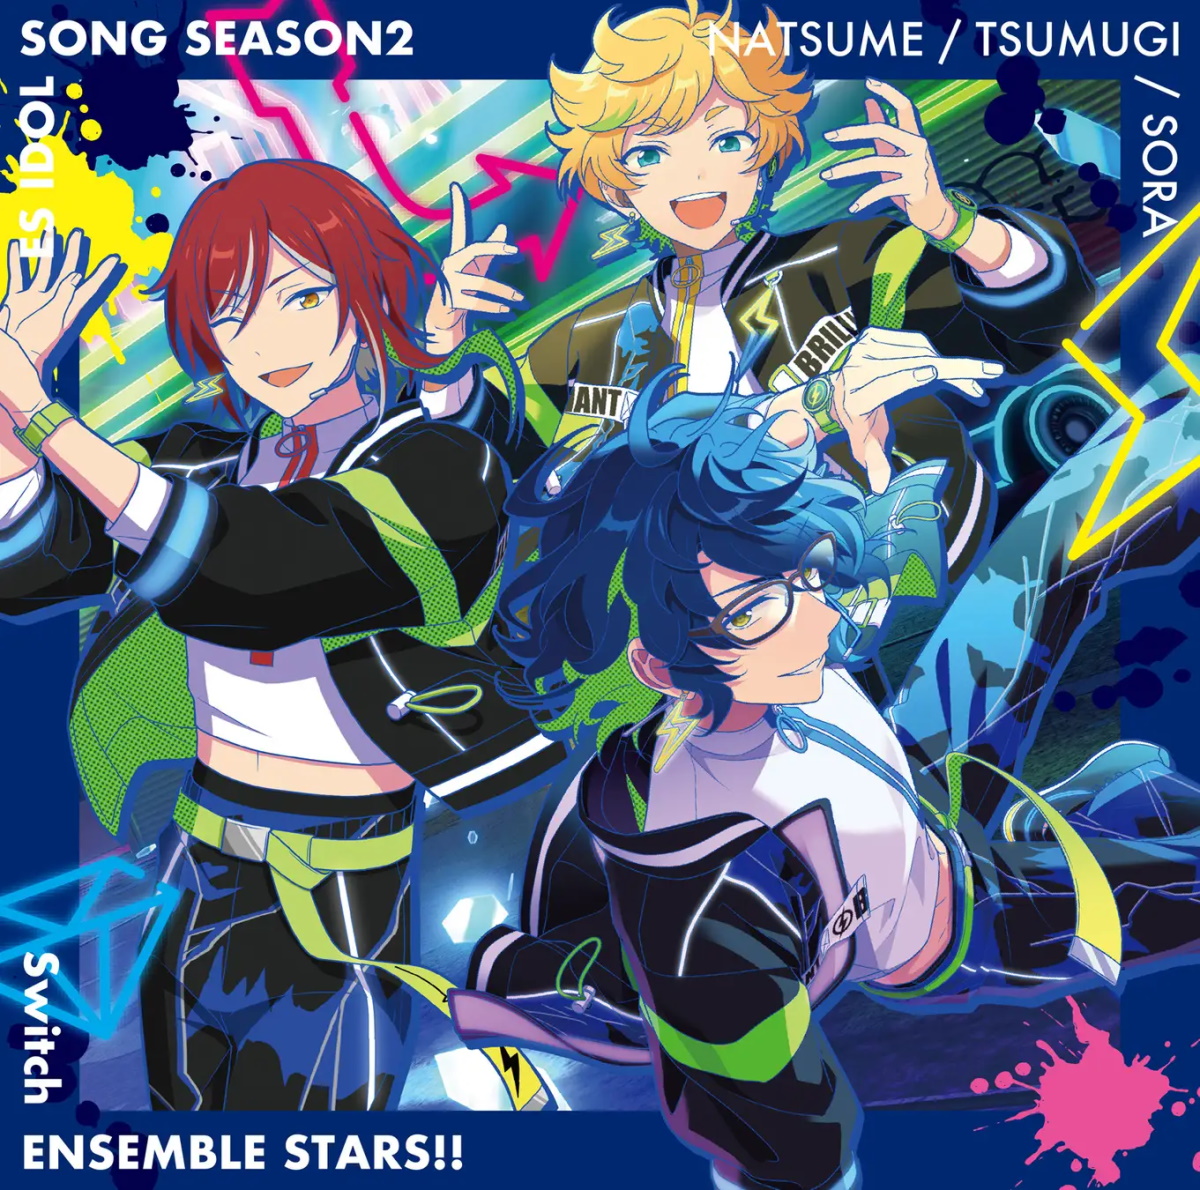 Cover art for『Switch - Brilliant Smile』from the release『Ensemble Stars!! ES Idol Song season2 Brilliant Smile』